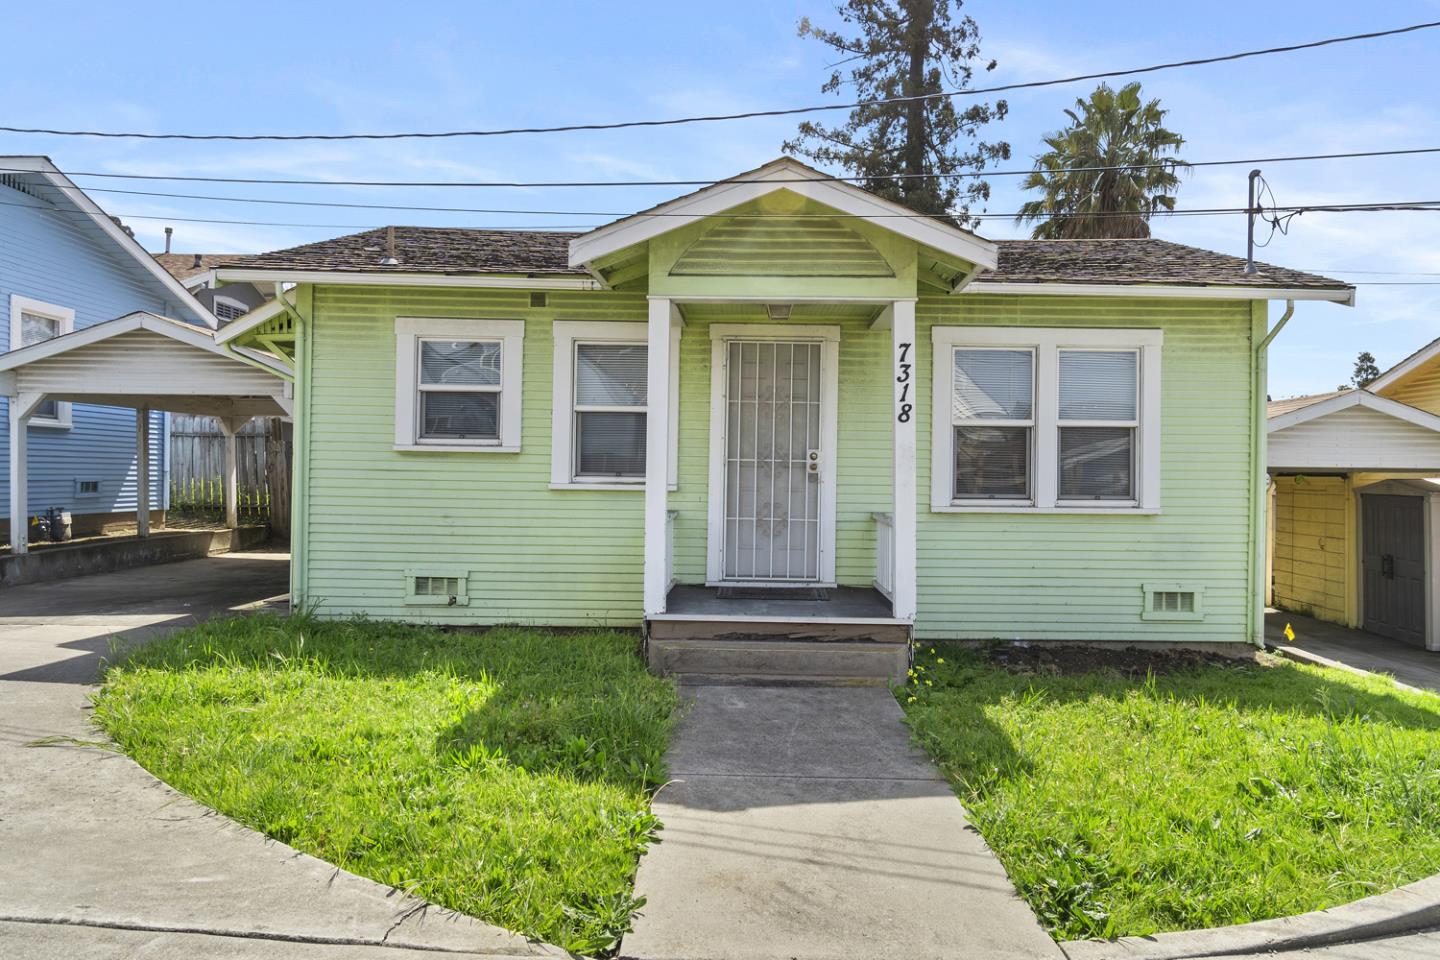 Photo of 7318 Ney Ave in Oakland, CA